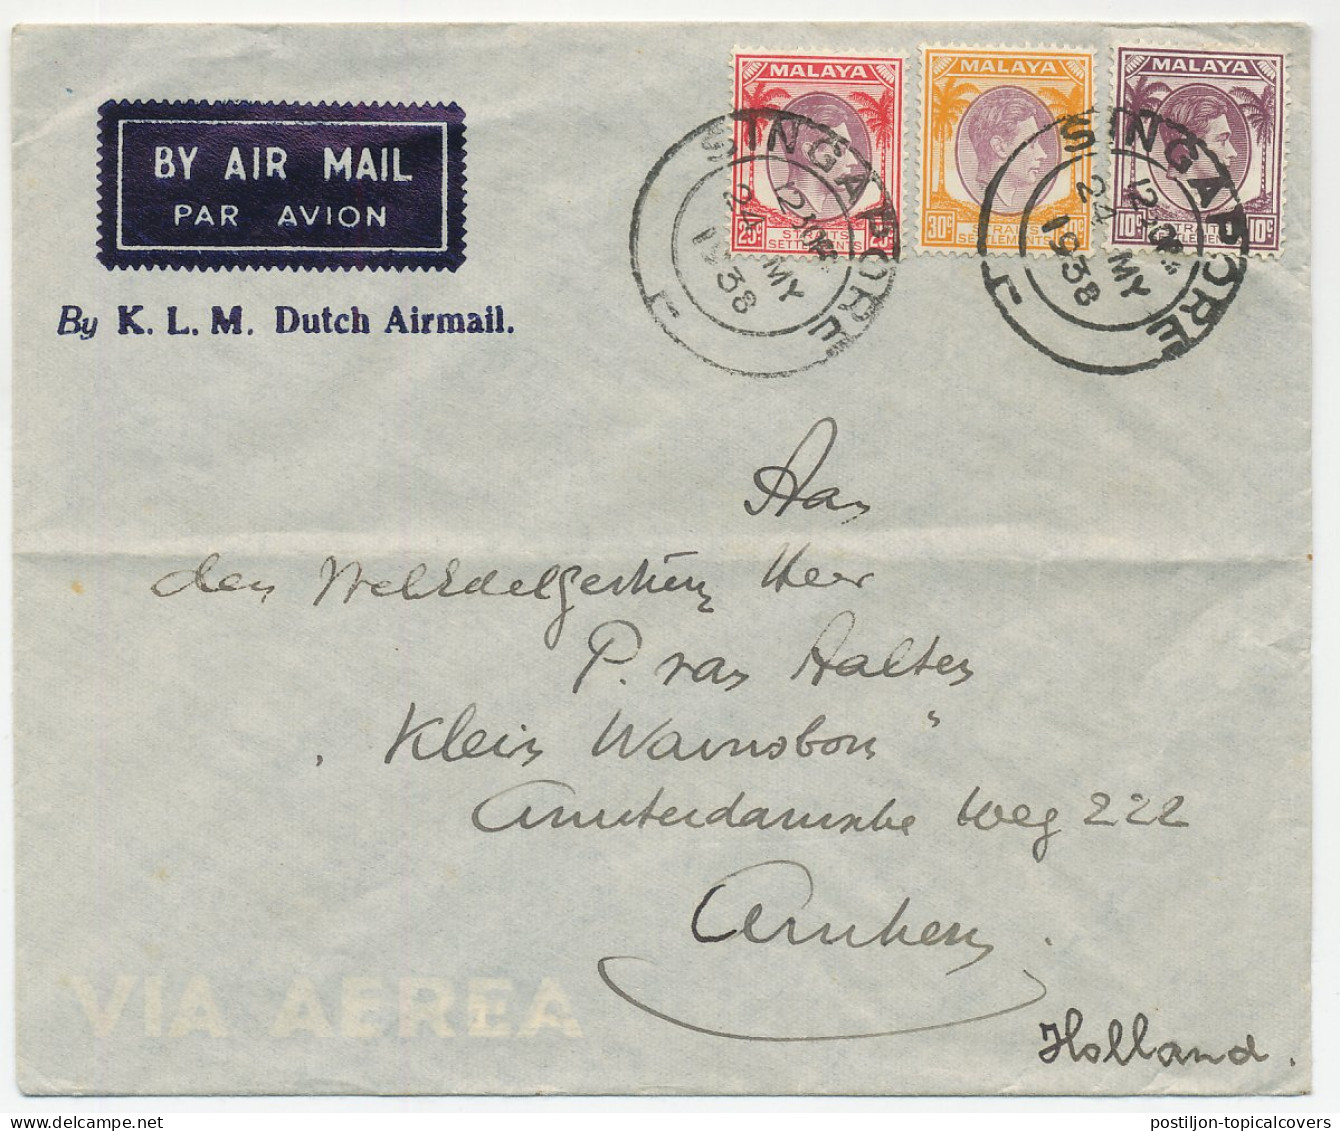  Cover / Postmark Singapore - Malaya - Netherlands 1938 By-KLM-Dutch-Airmail  - Aviones